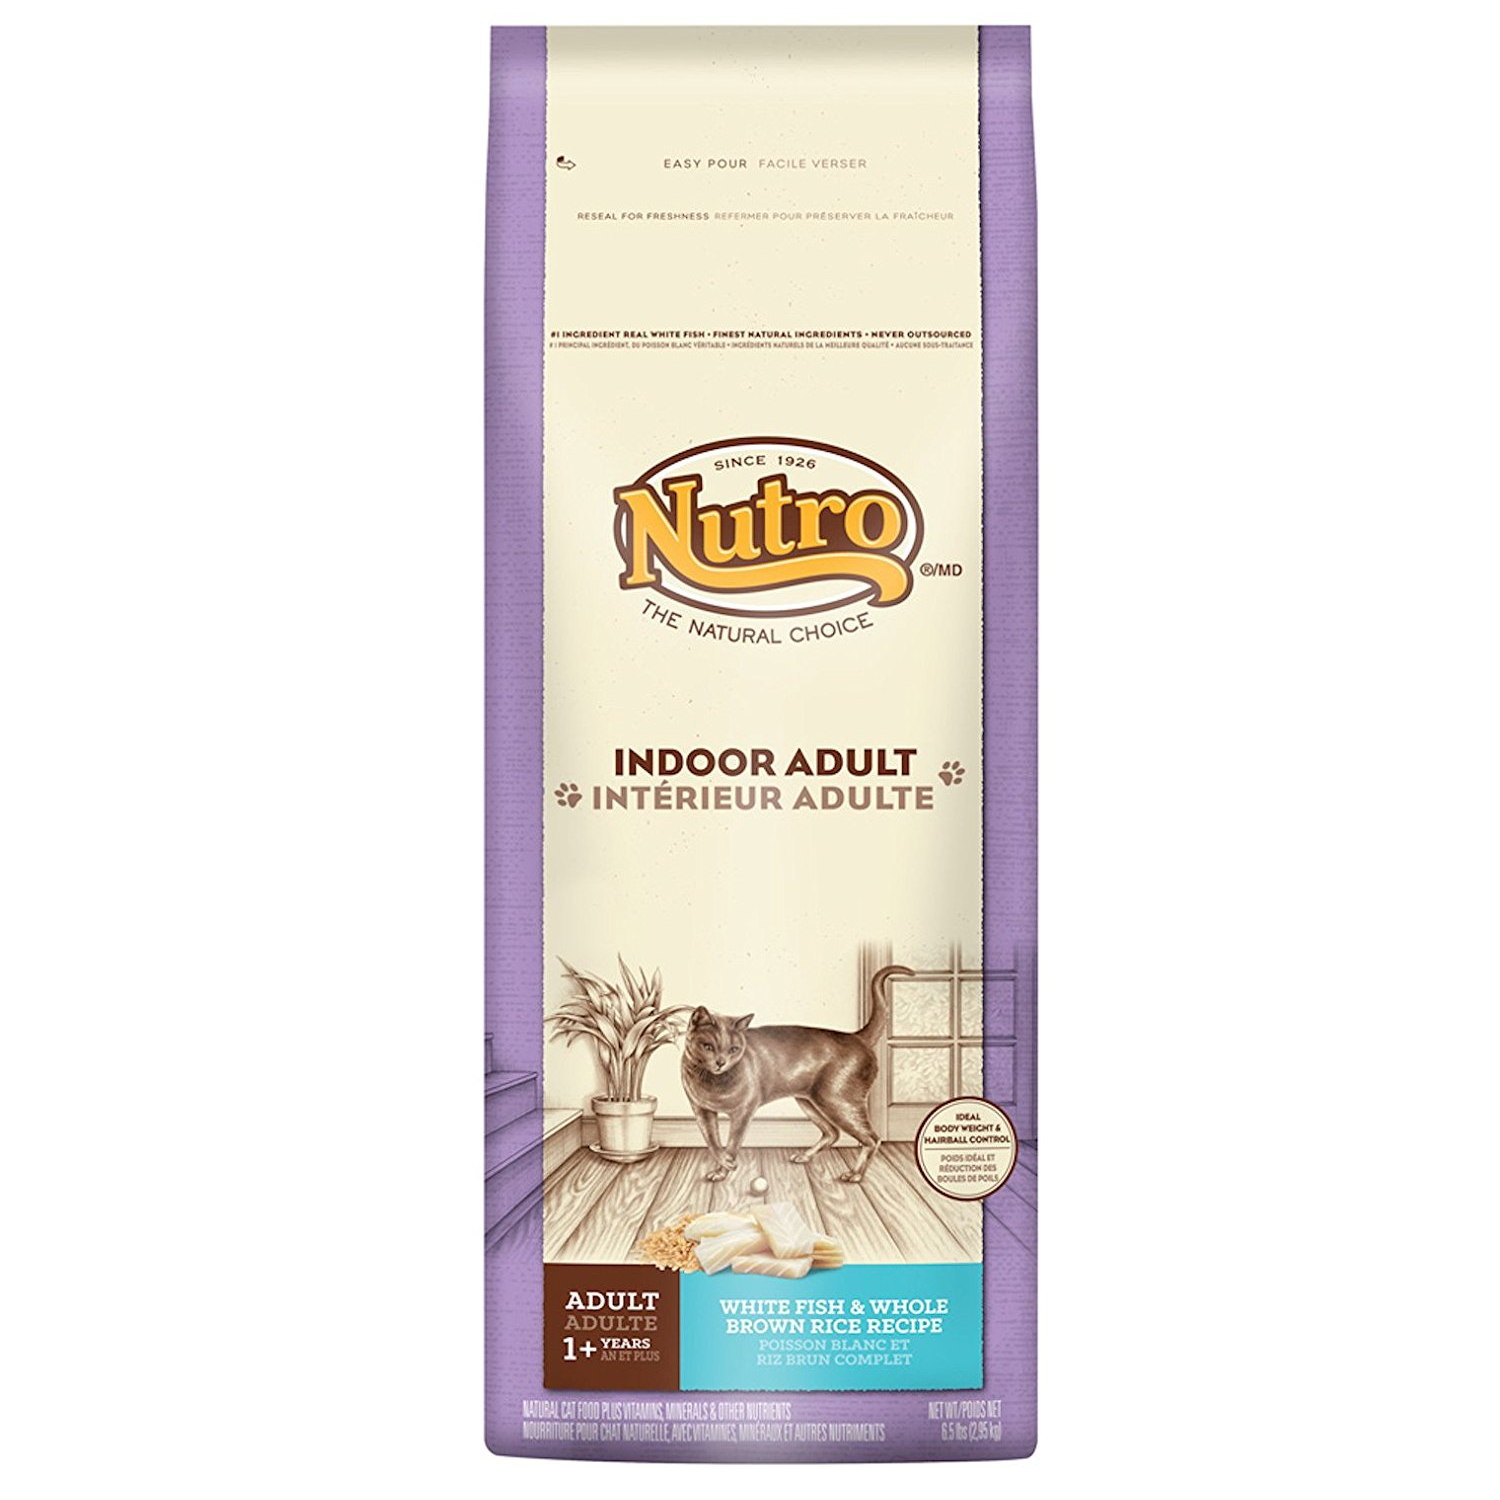 NUTRO Indoor Cat Adult Dry Cat Food Only $7.04 Shipped!